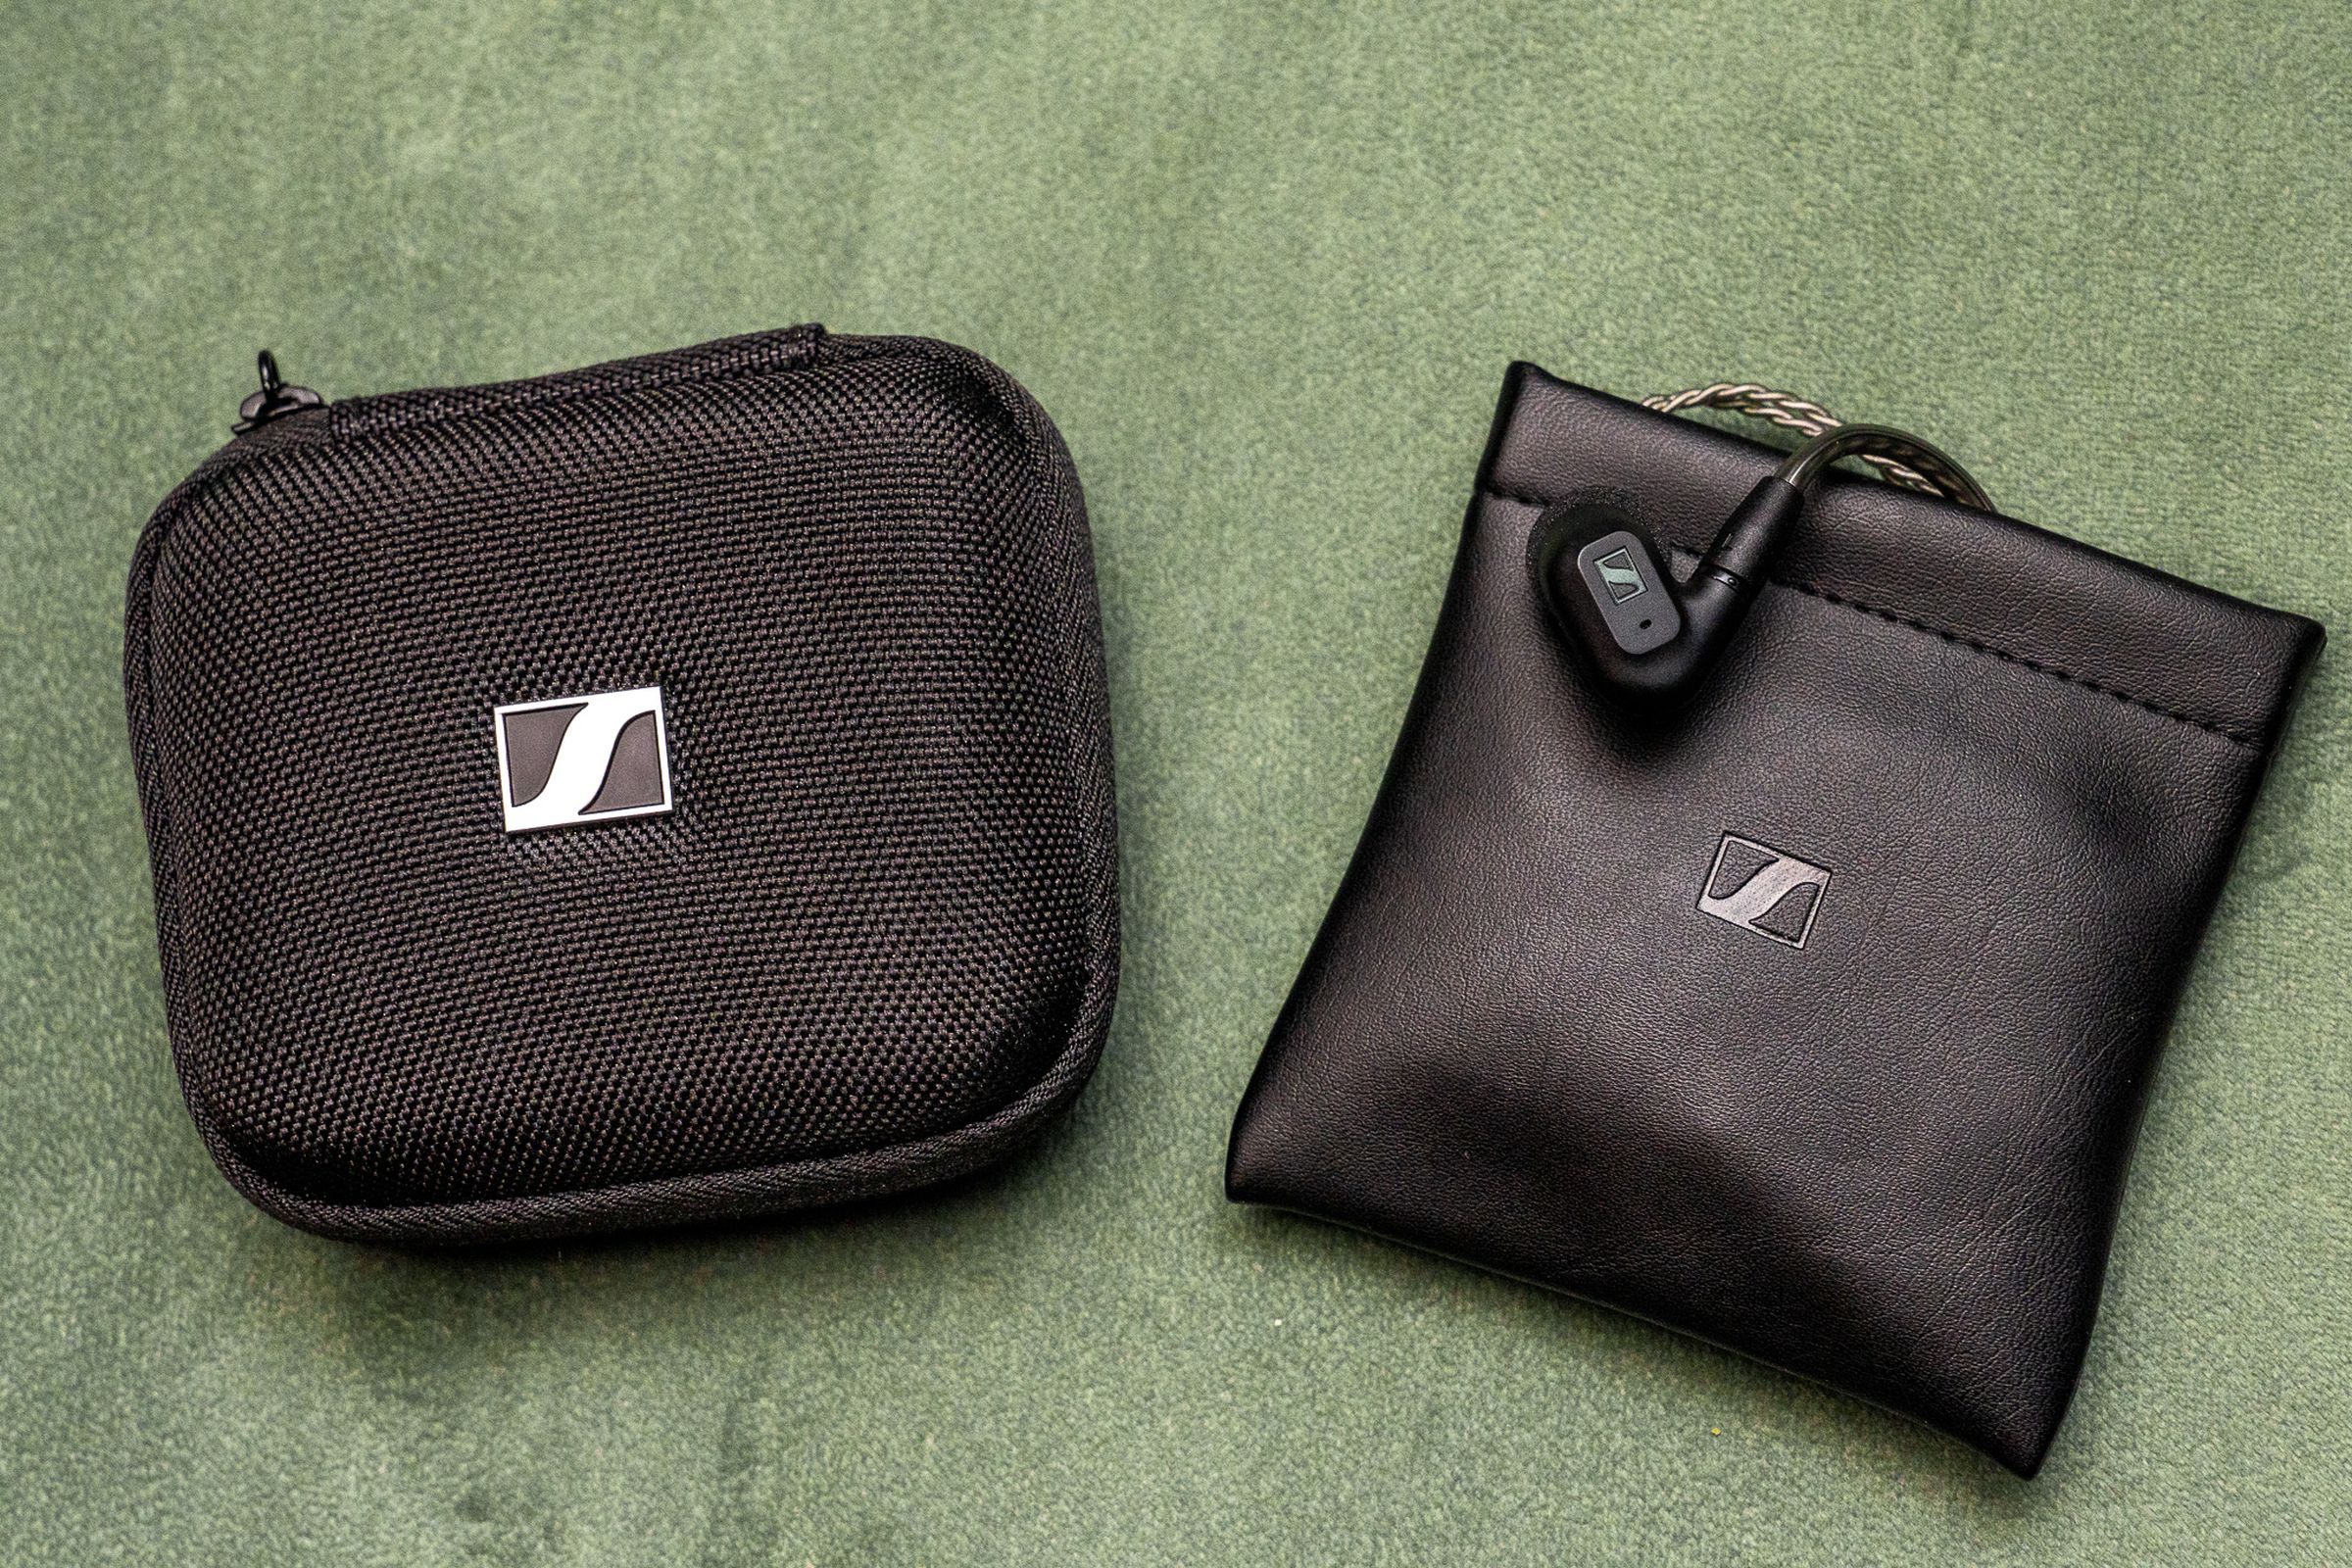 A photo of Sennheiser's IE 600 and IE 200 headphone cases.